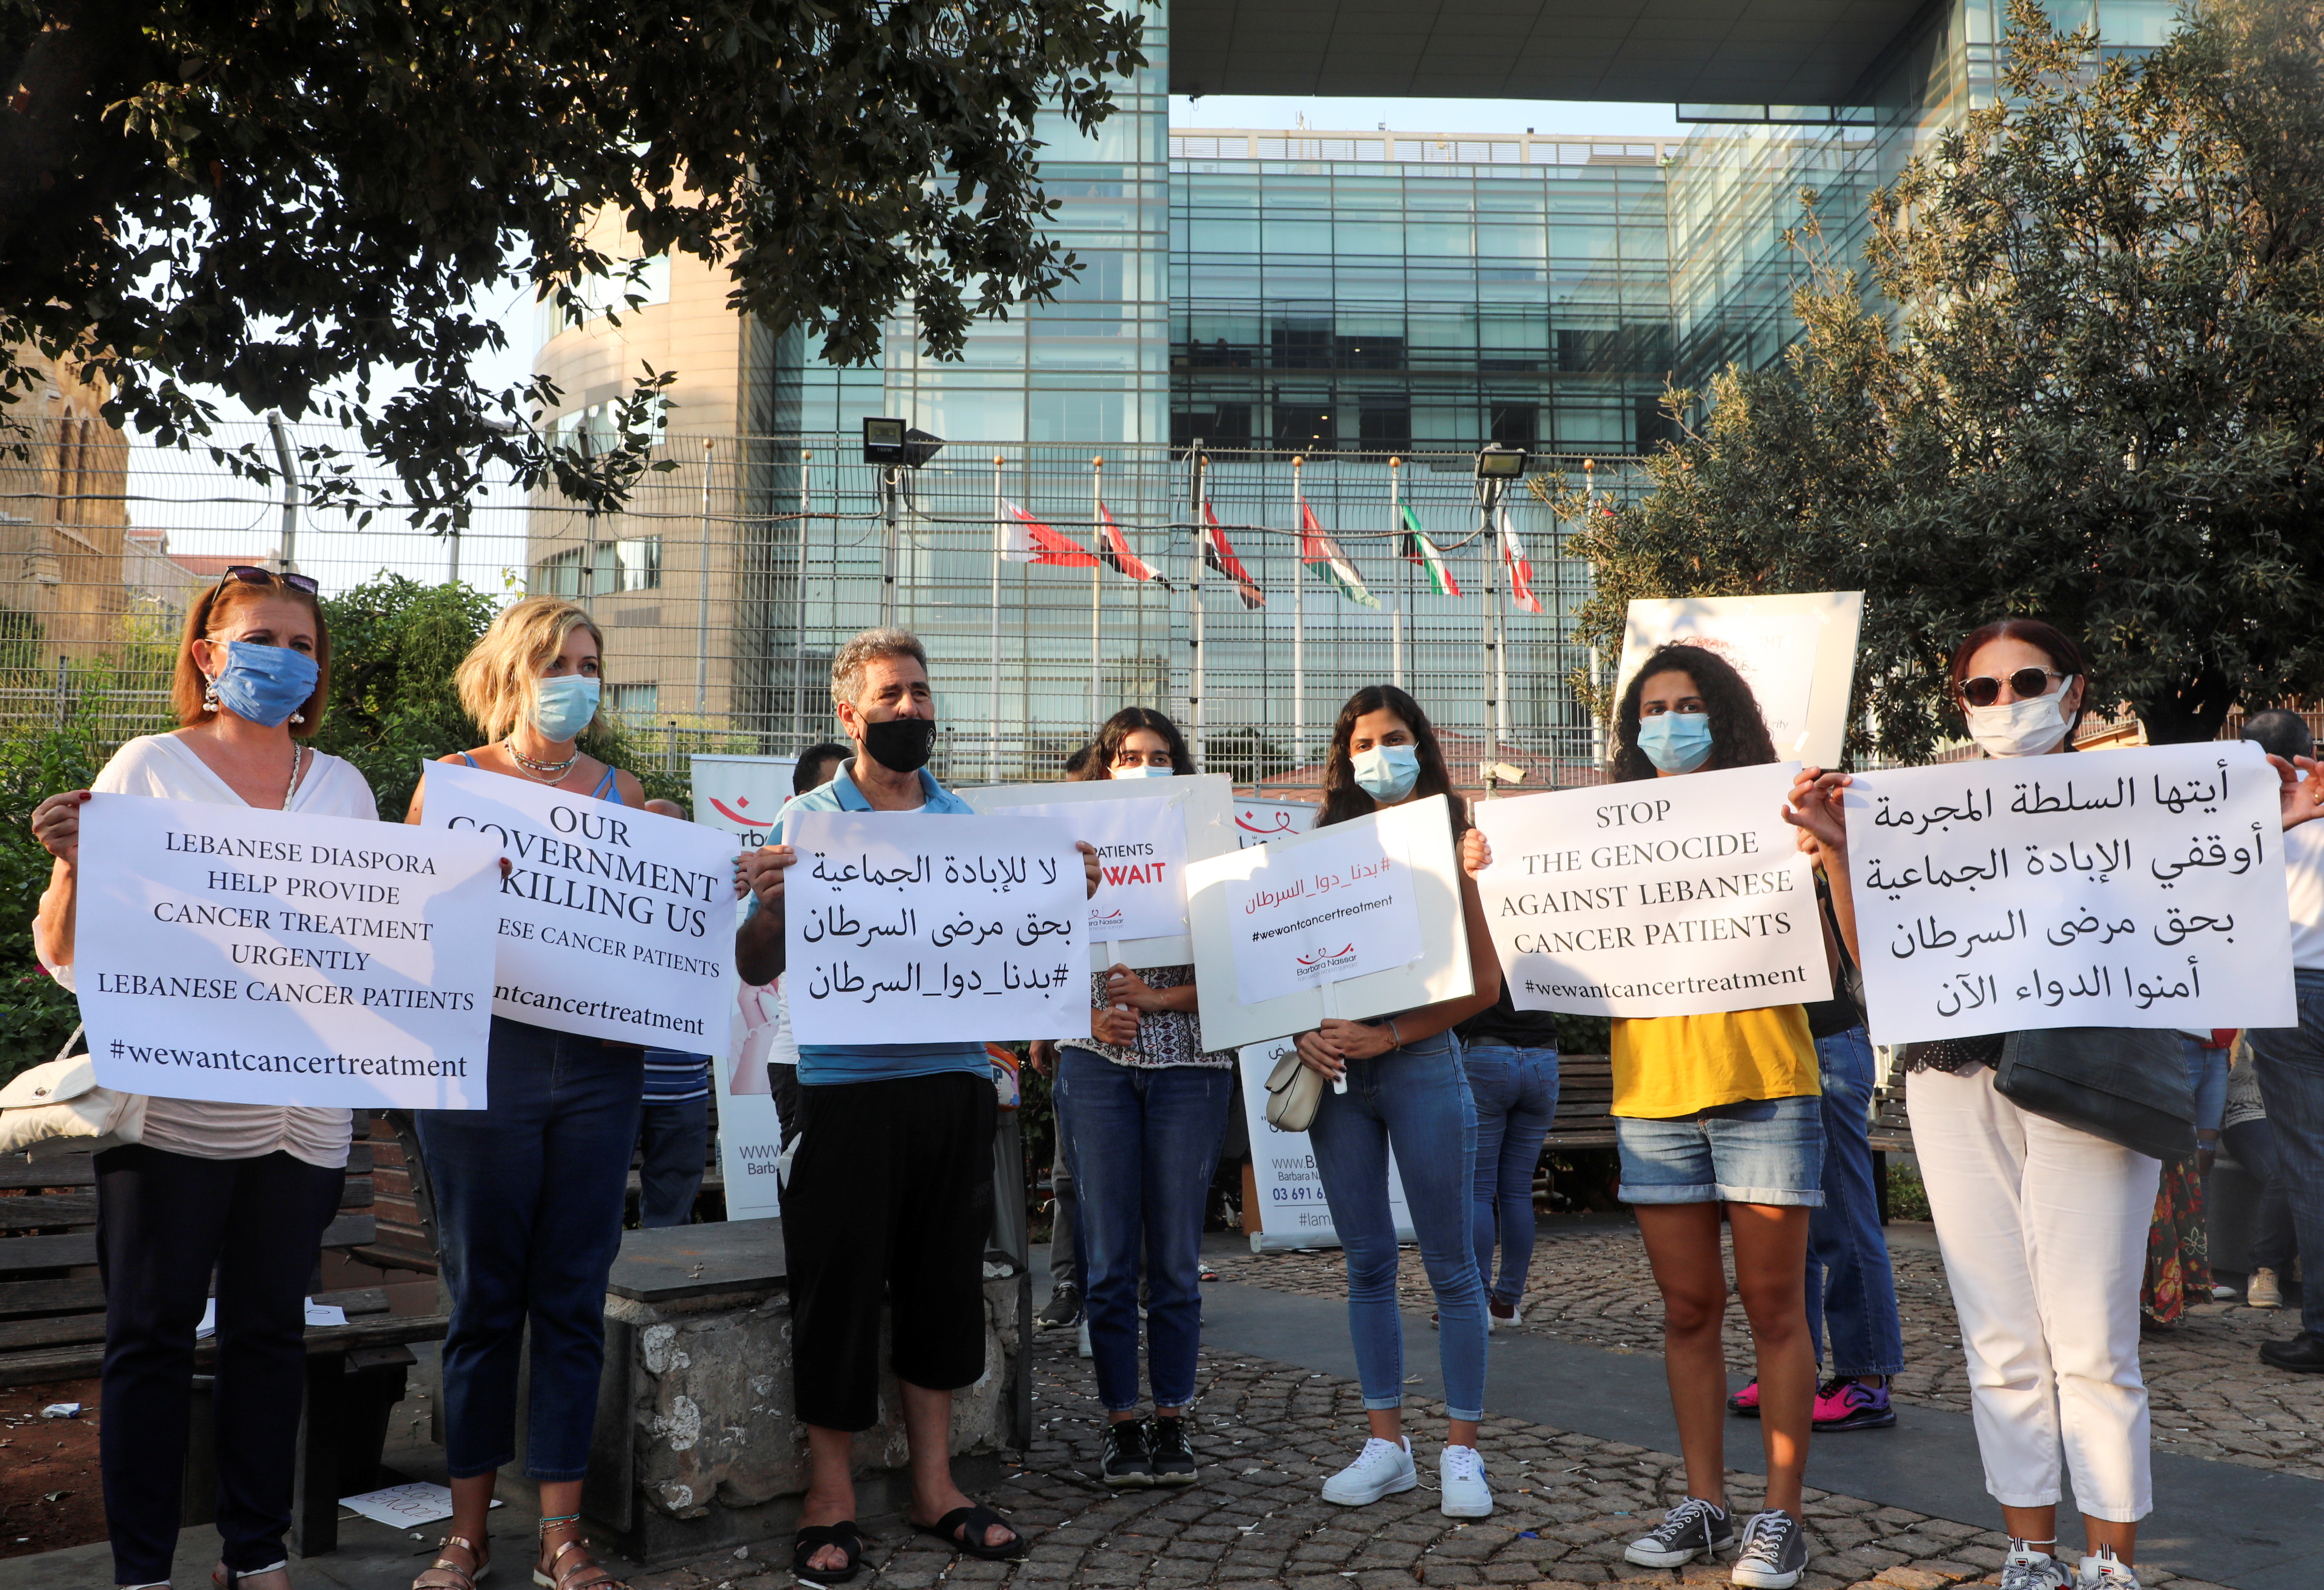 People hold signs during a sit-in demonstration as shortages of cancer medications spread, in front of the U.N. headquarters in Beirut